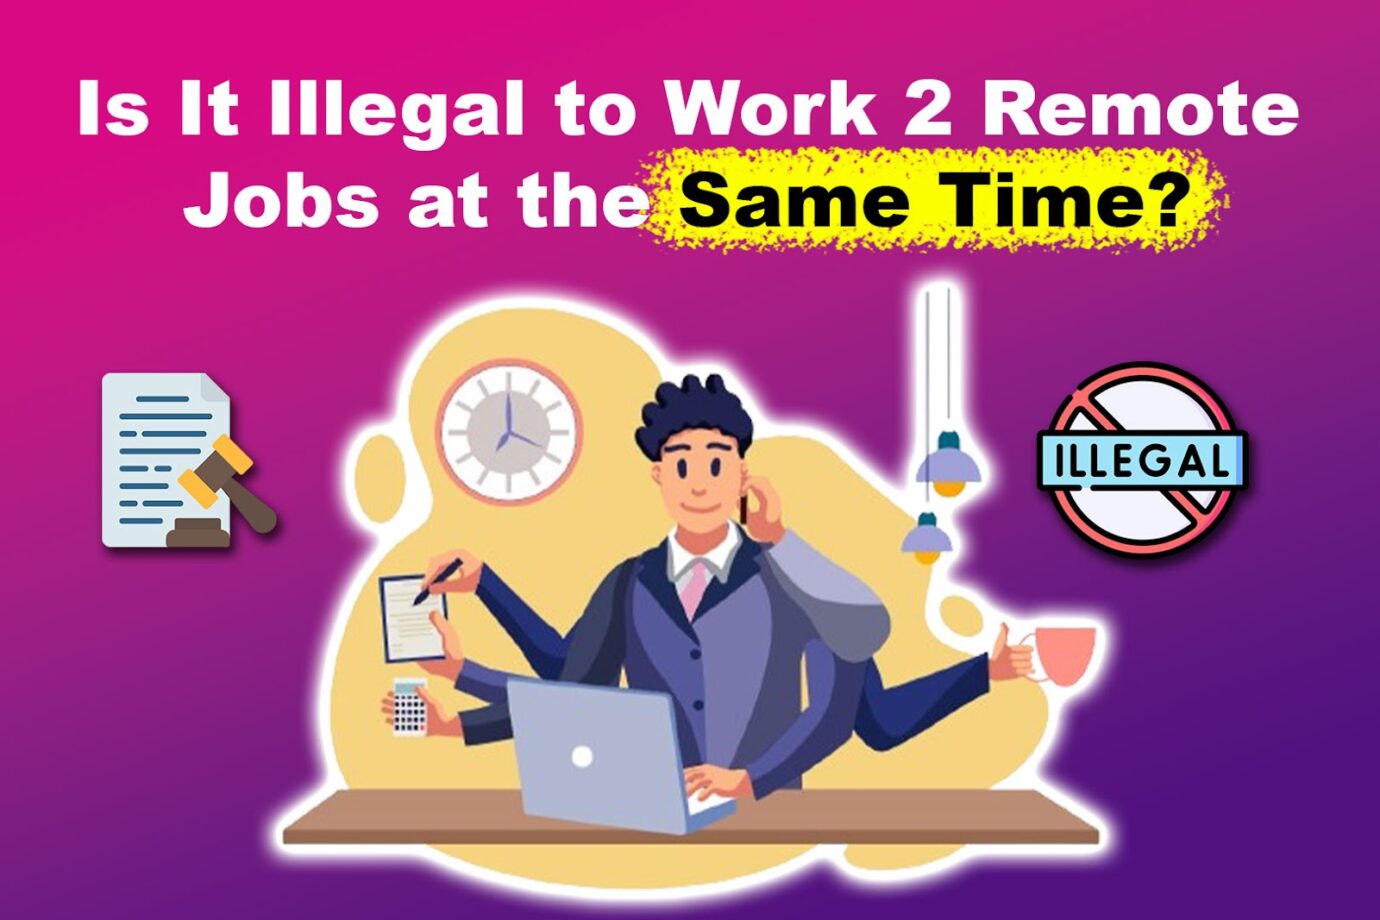 Is It Illegal to Work 2 Remote Jobs at the Same Time